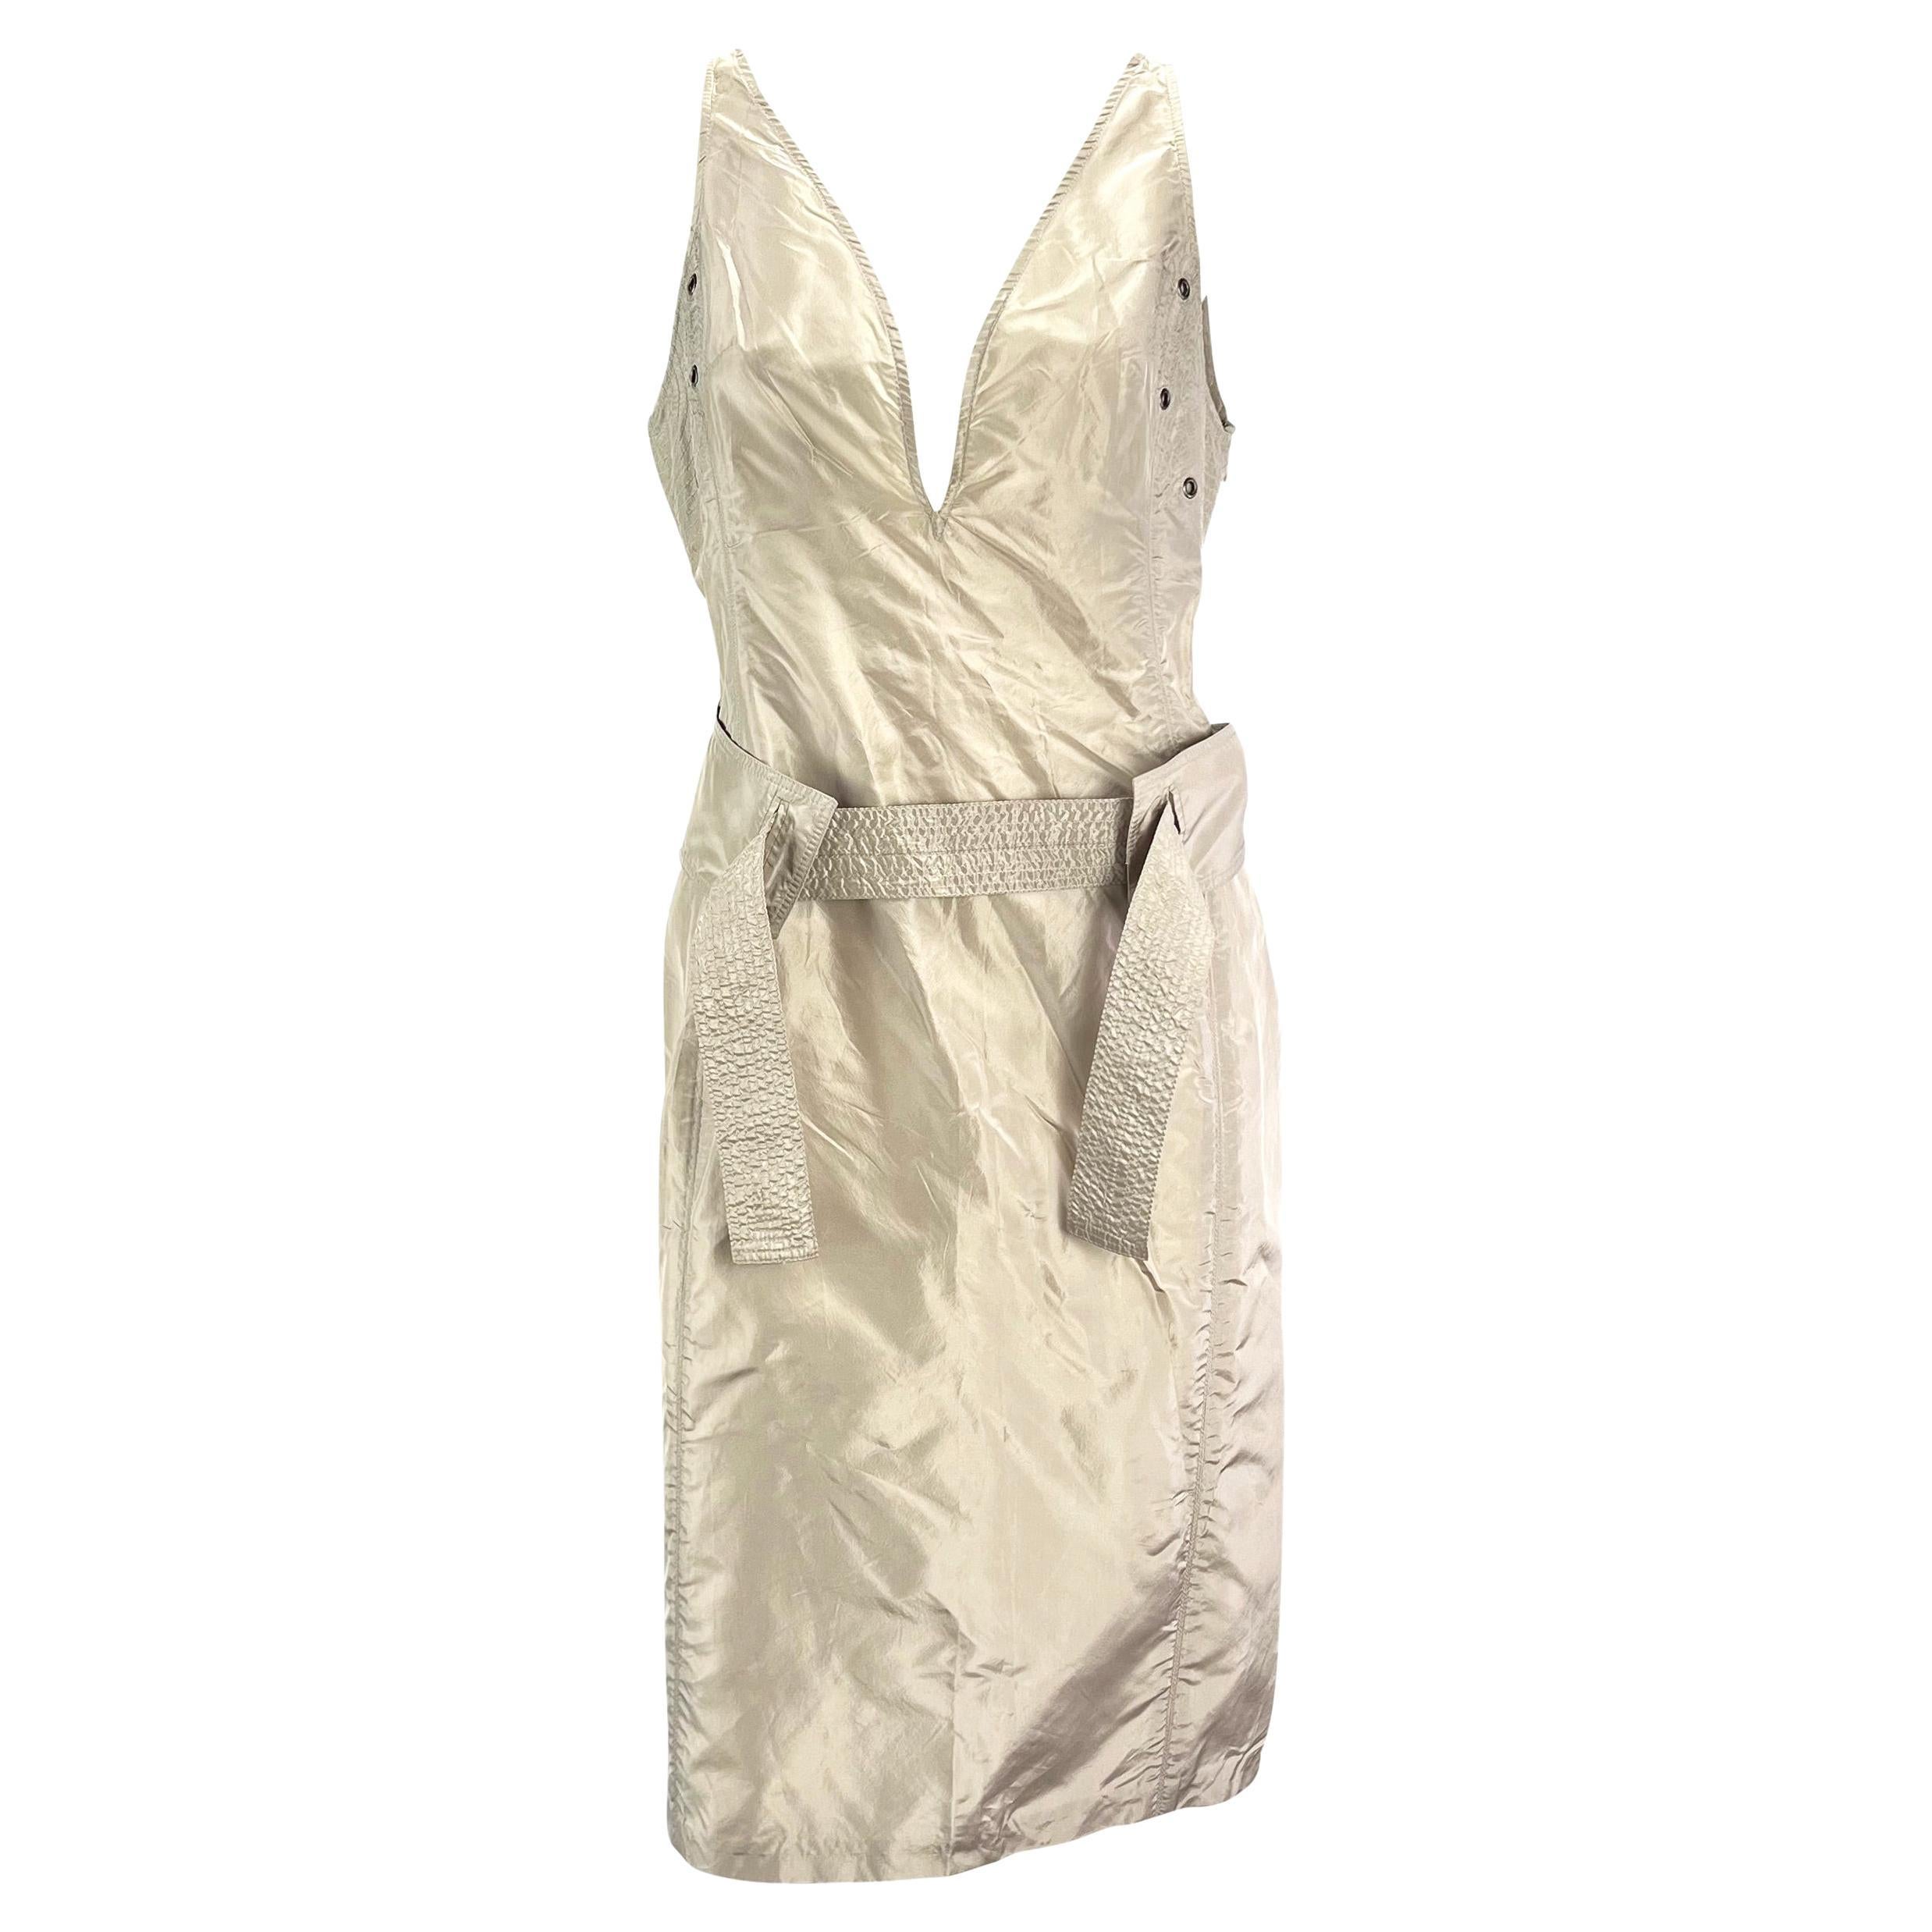 S/S 2003 Gucci by Tom Ford Silk Taupe Belted Dress  For Sale 2